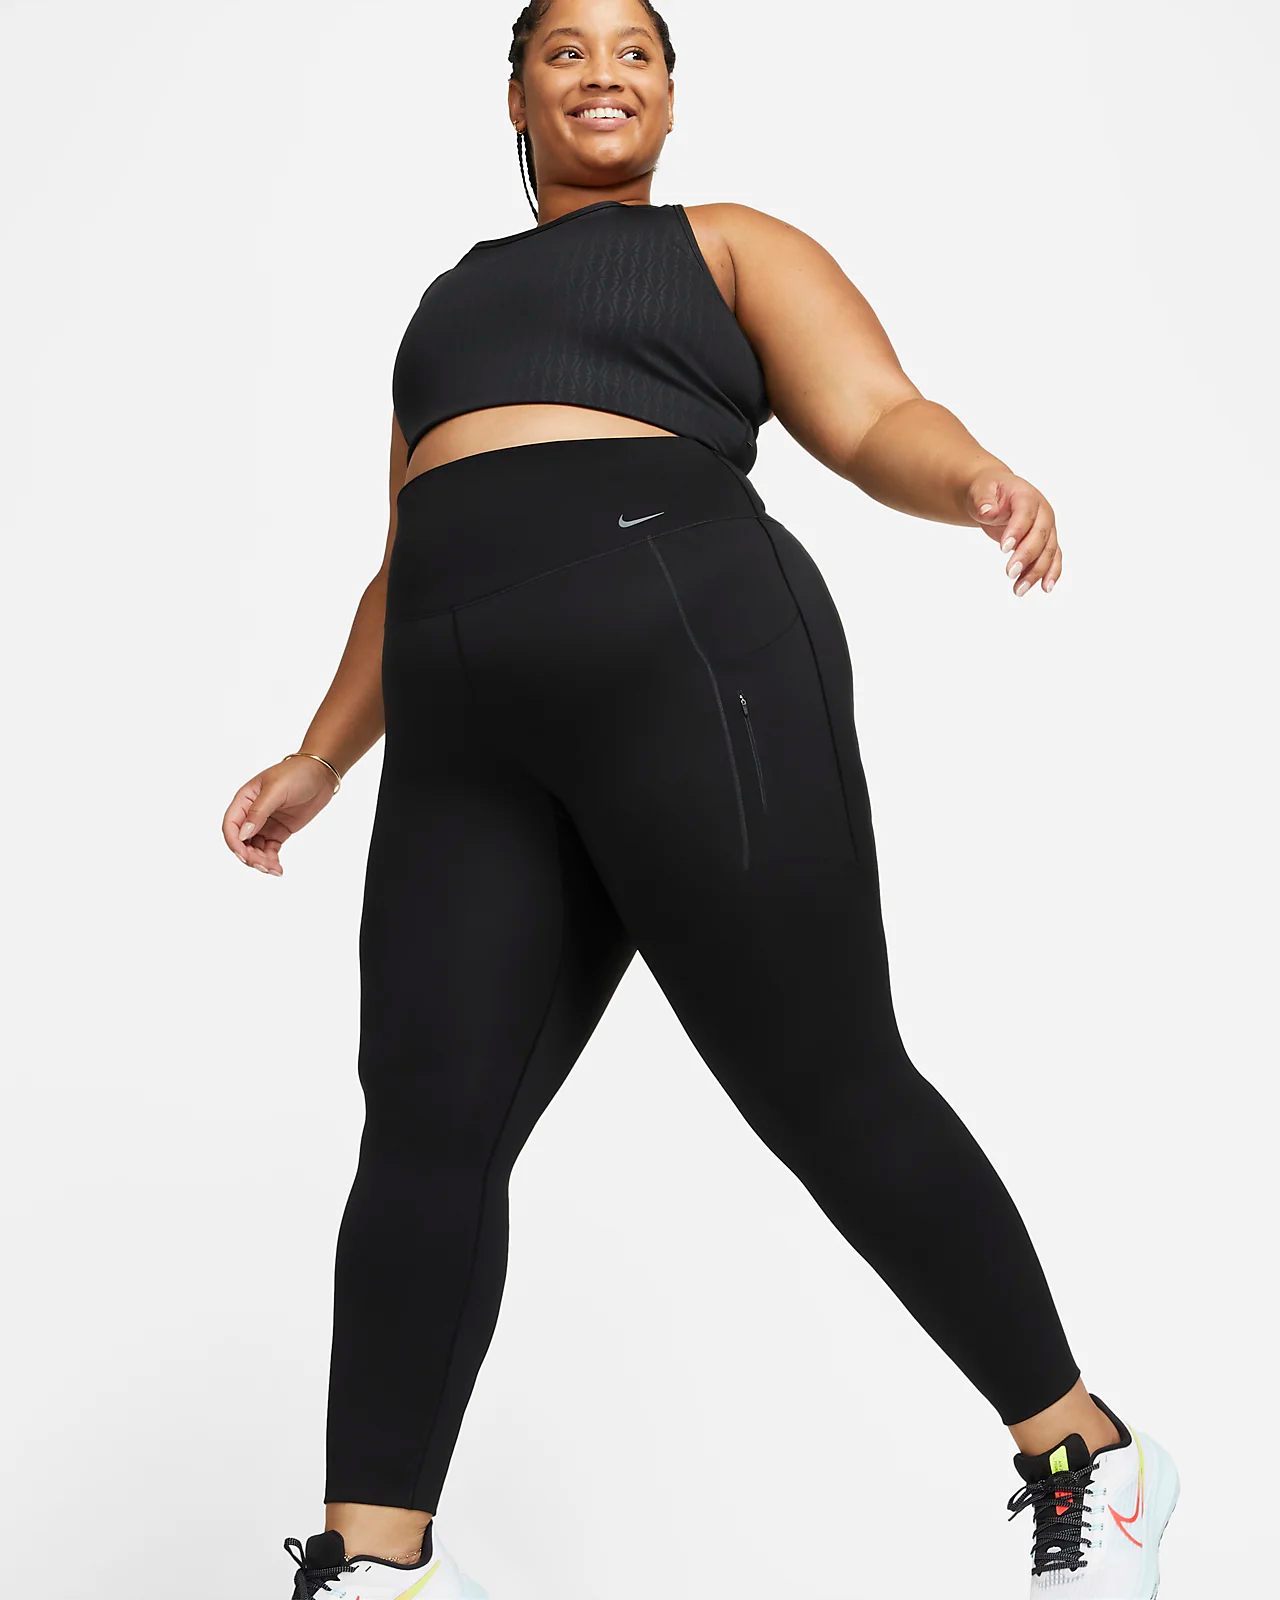 Plus size leggings for women, selecting the perfect pair of leggings is essential for women of all sizes, and for plus-size women